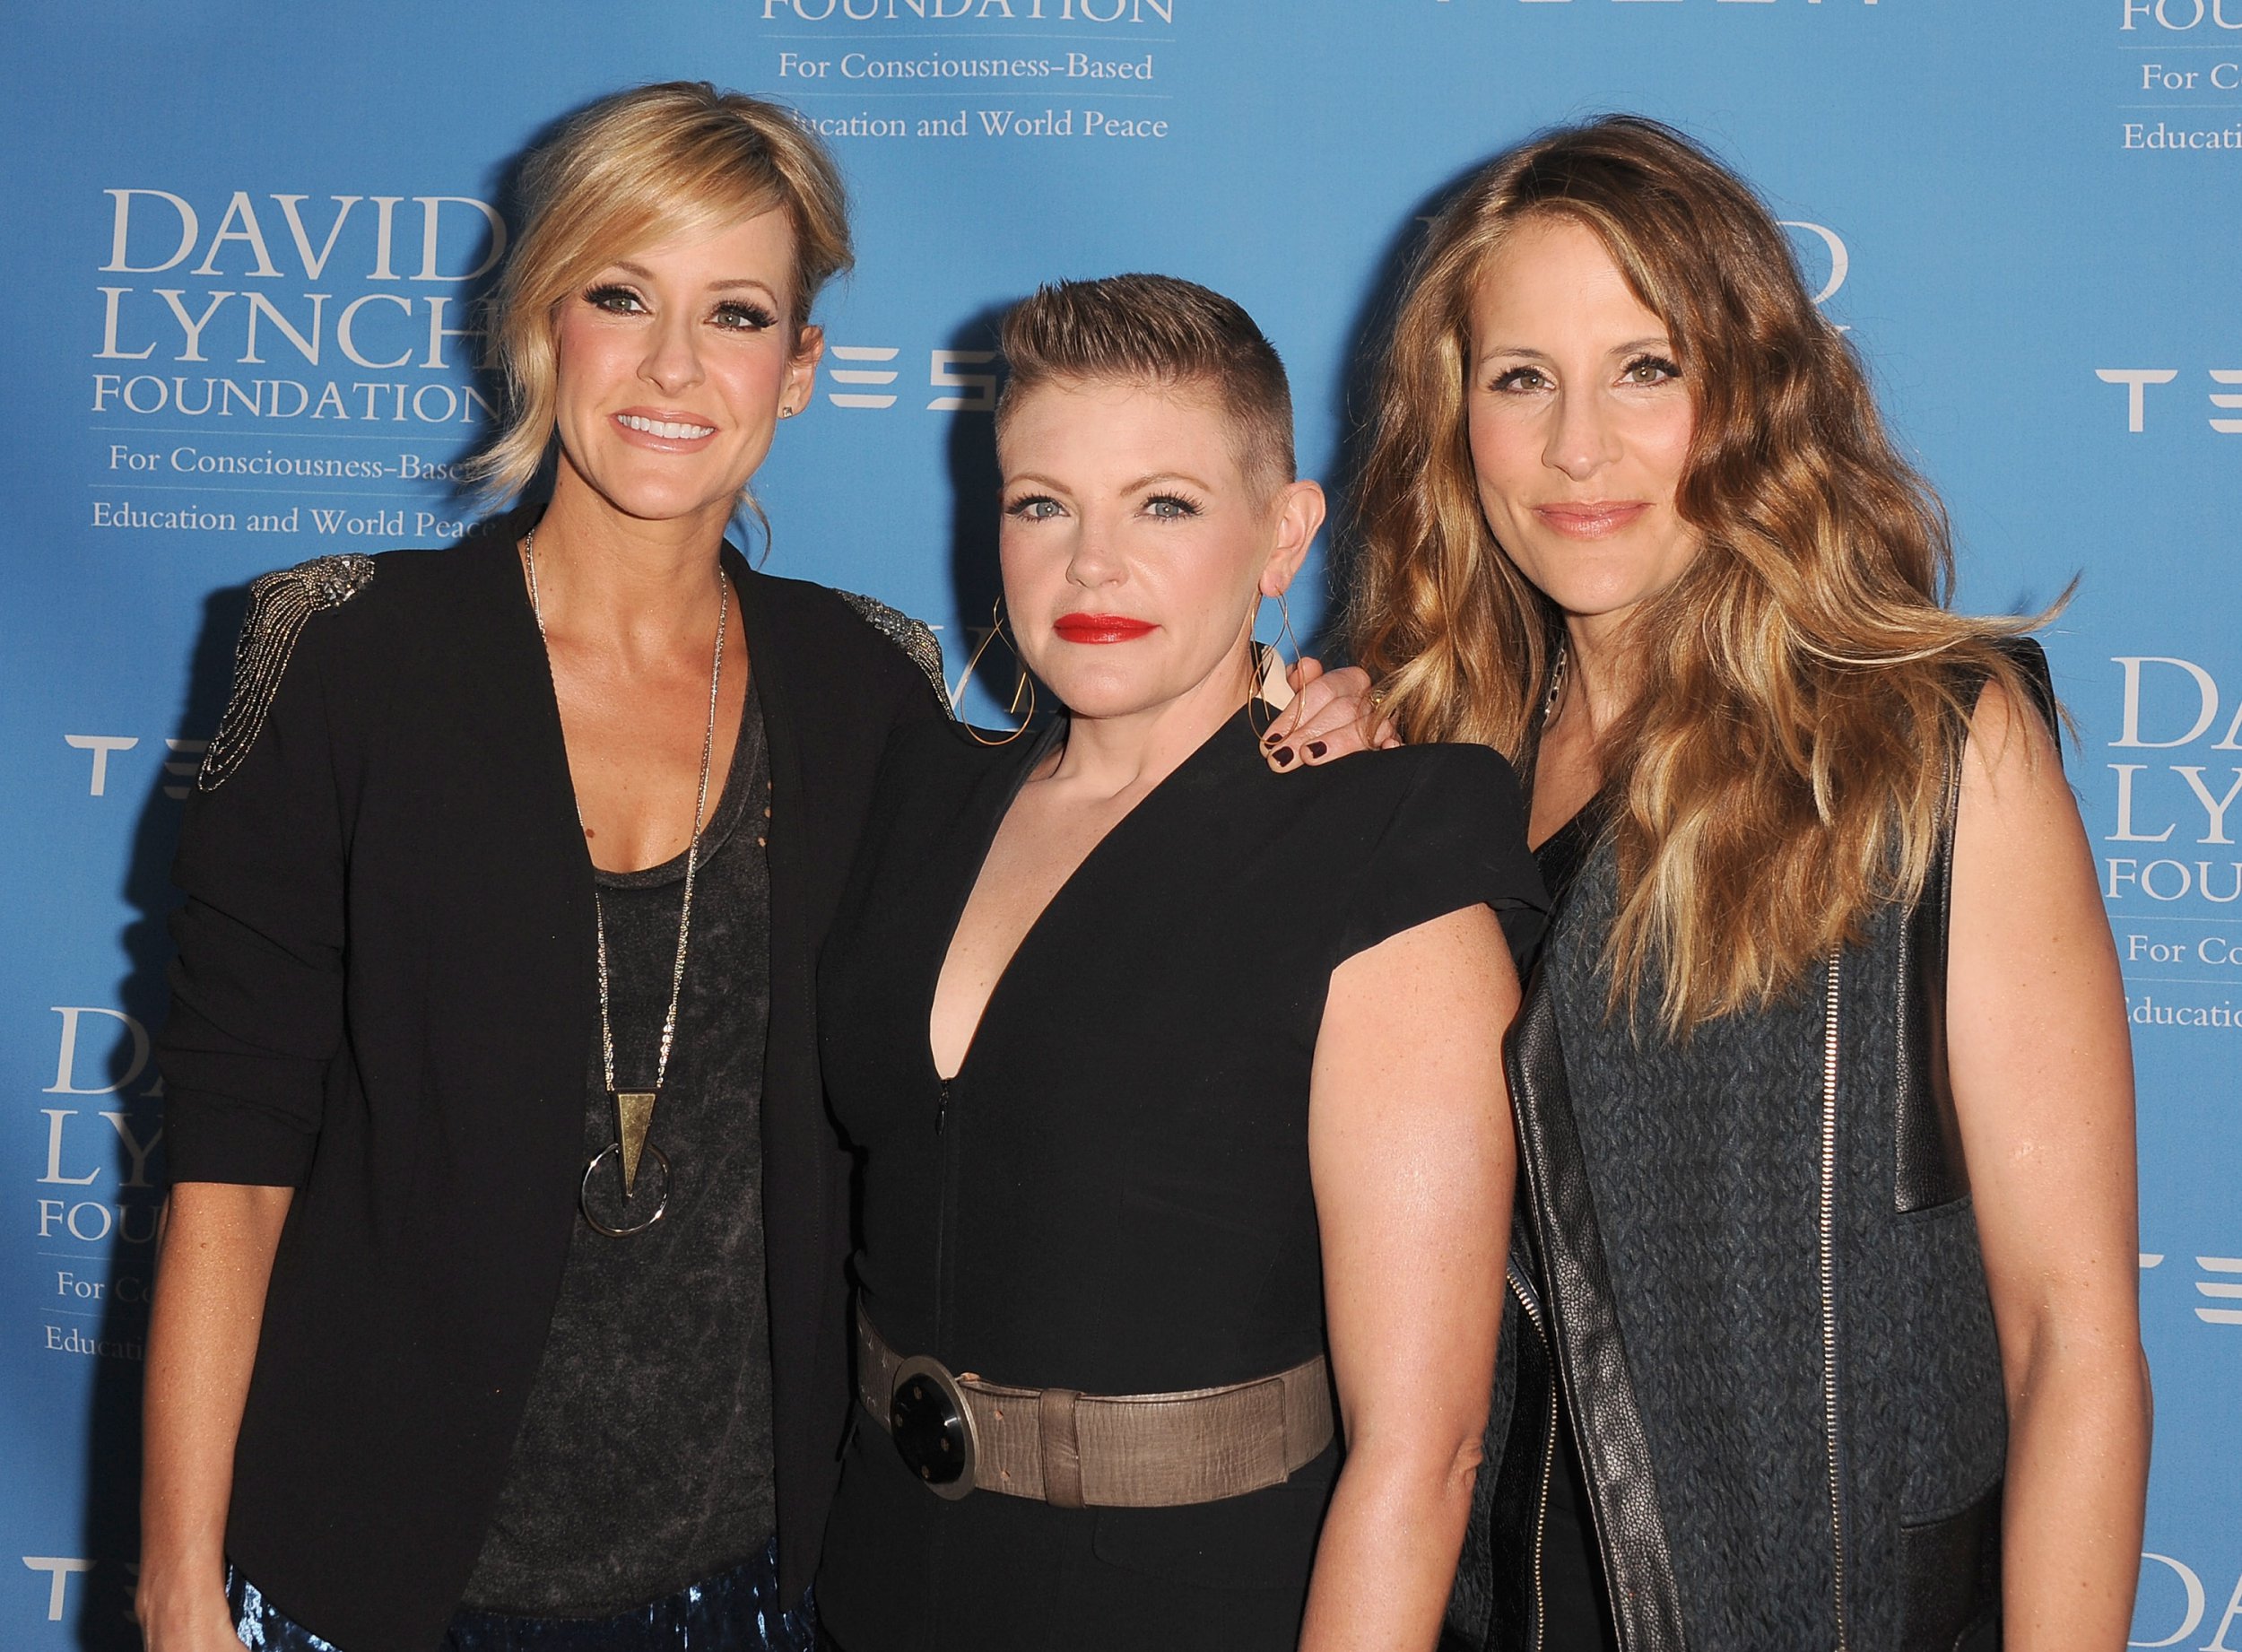 The Chicks attend The David Lynch Foundation Award Gala honoring Rick Rubin at Regent Beverly Wilshire Hotel on February 27, 2014, in Beverly Hills, California